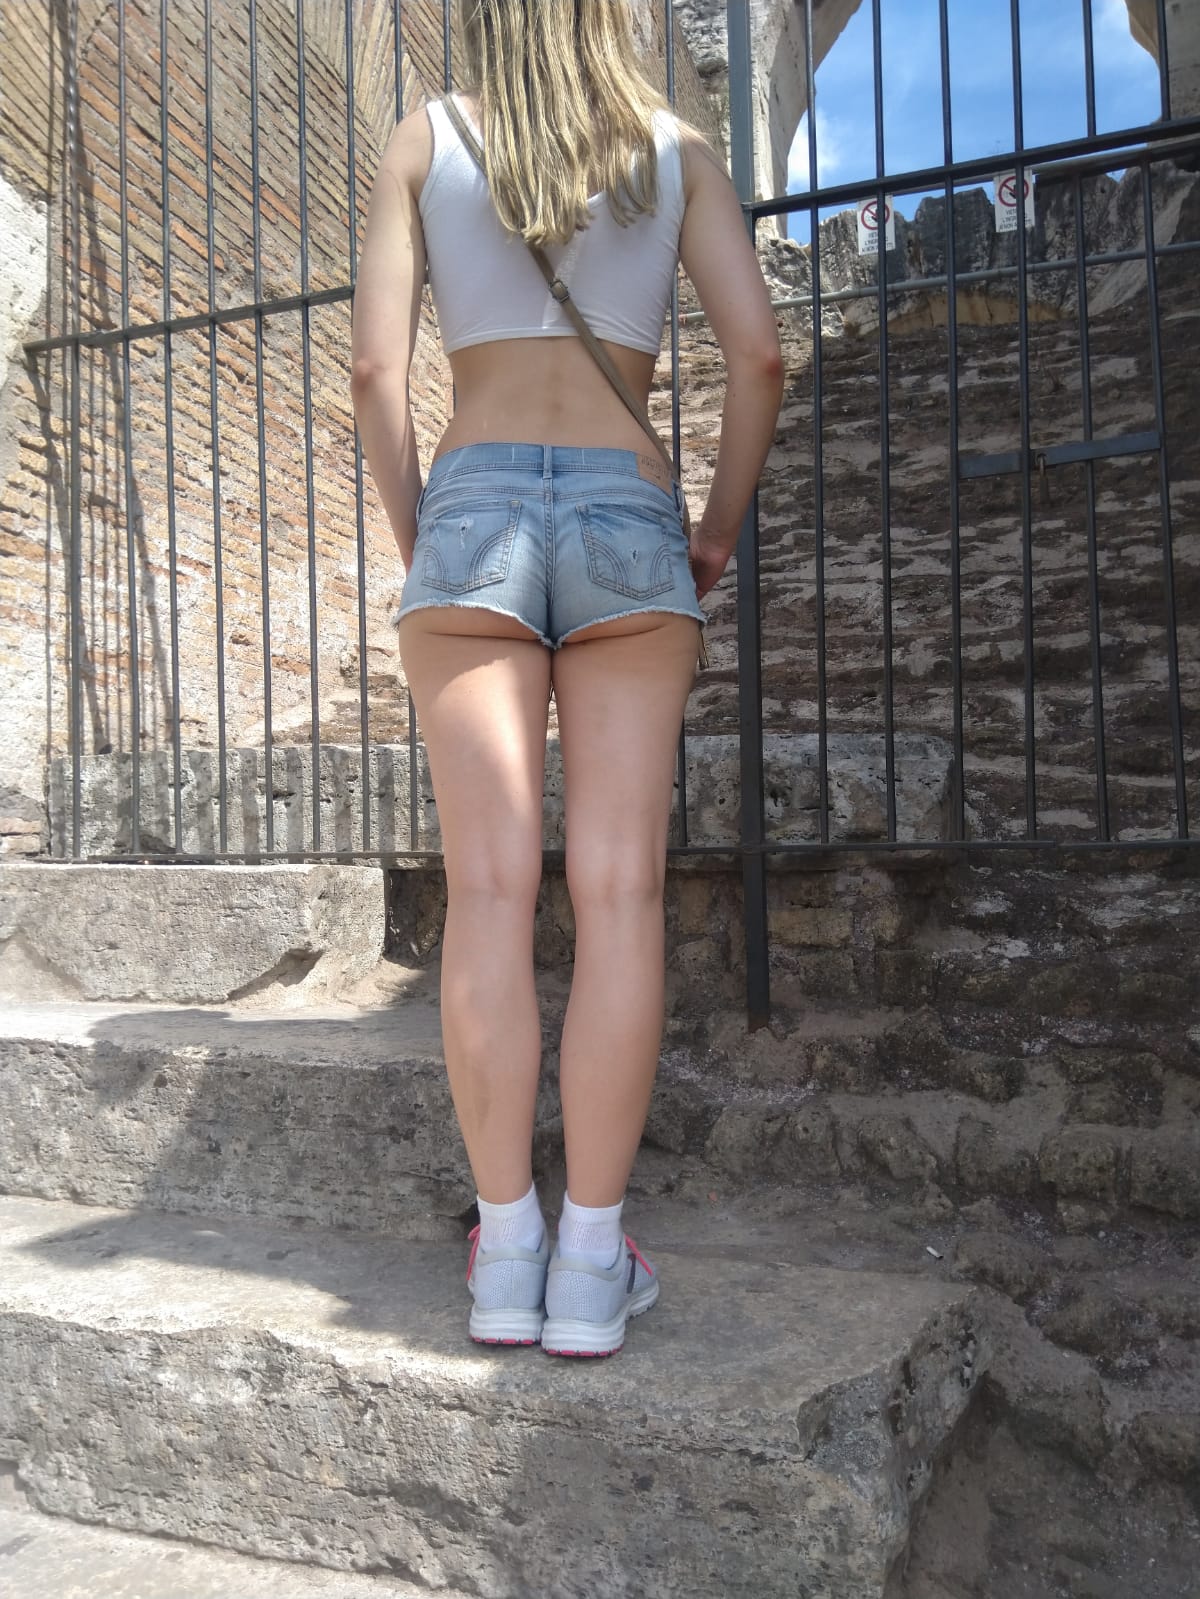 1200px x 1599px - Short shorts are [f]un when out sightseeing! Porn Pic - EPORNER